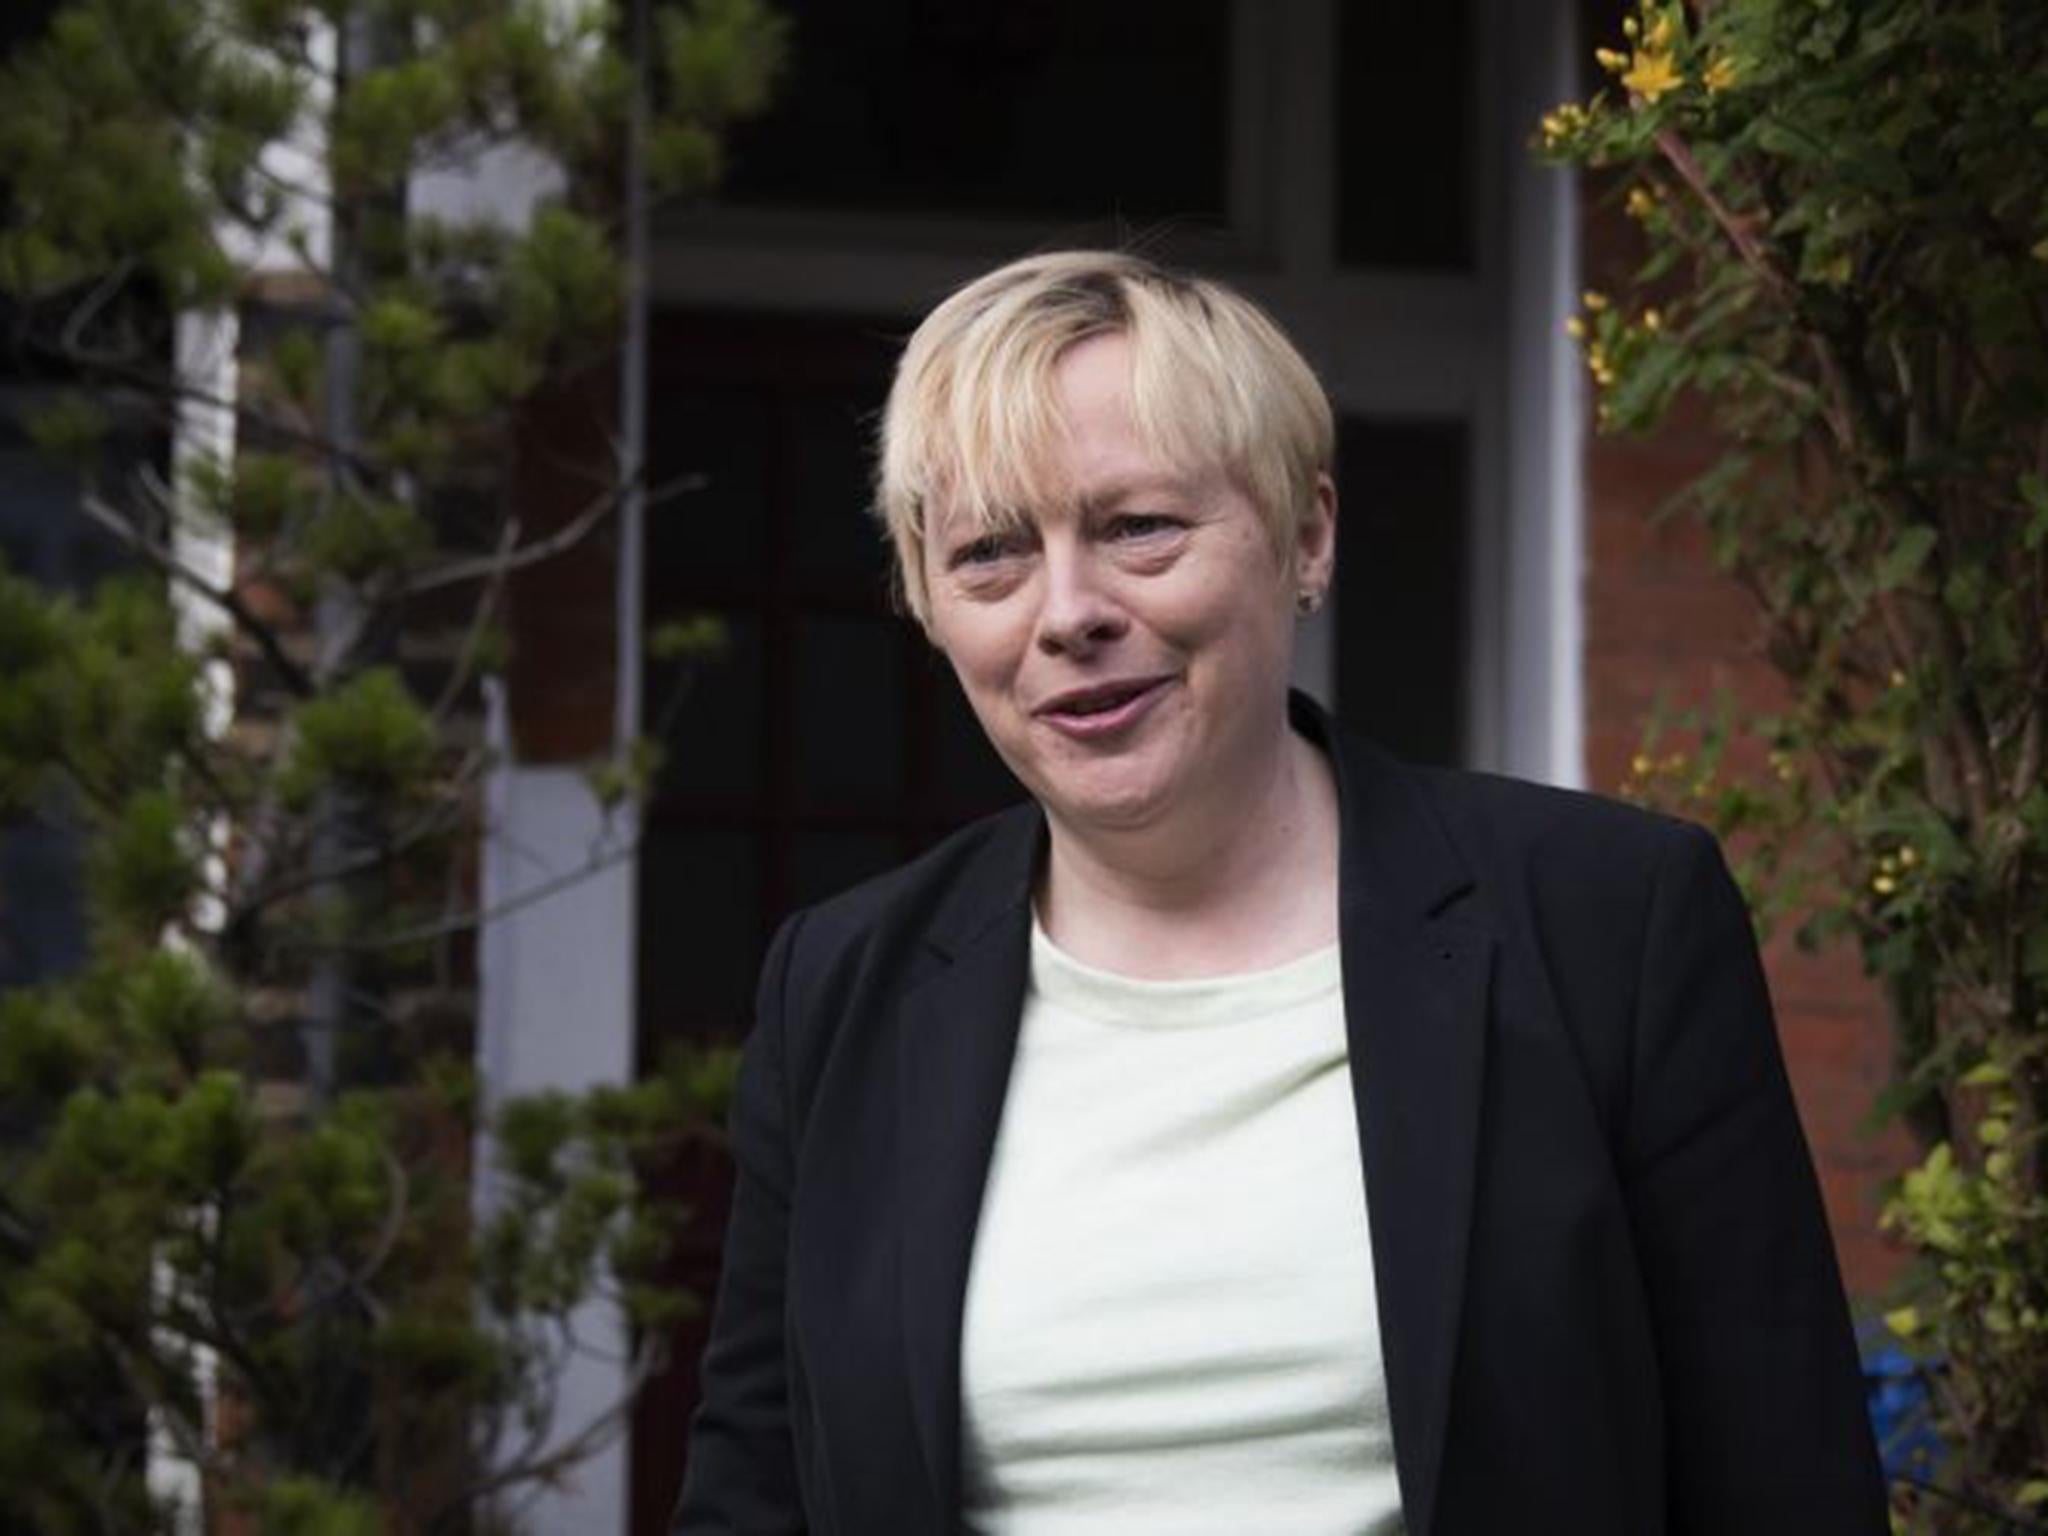 Angela Eagle decided to give Jeremy Corbyn more time to decide whether he really wants to carry on as Labour leader